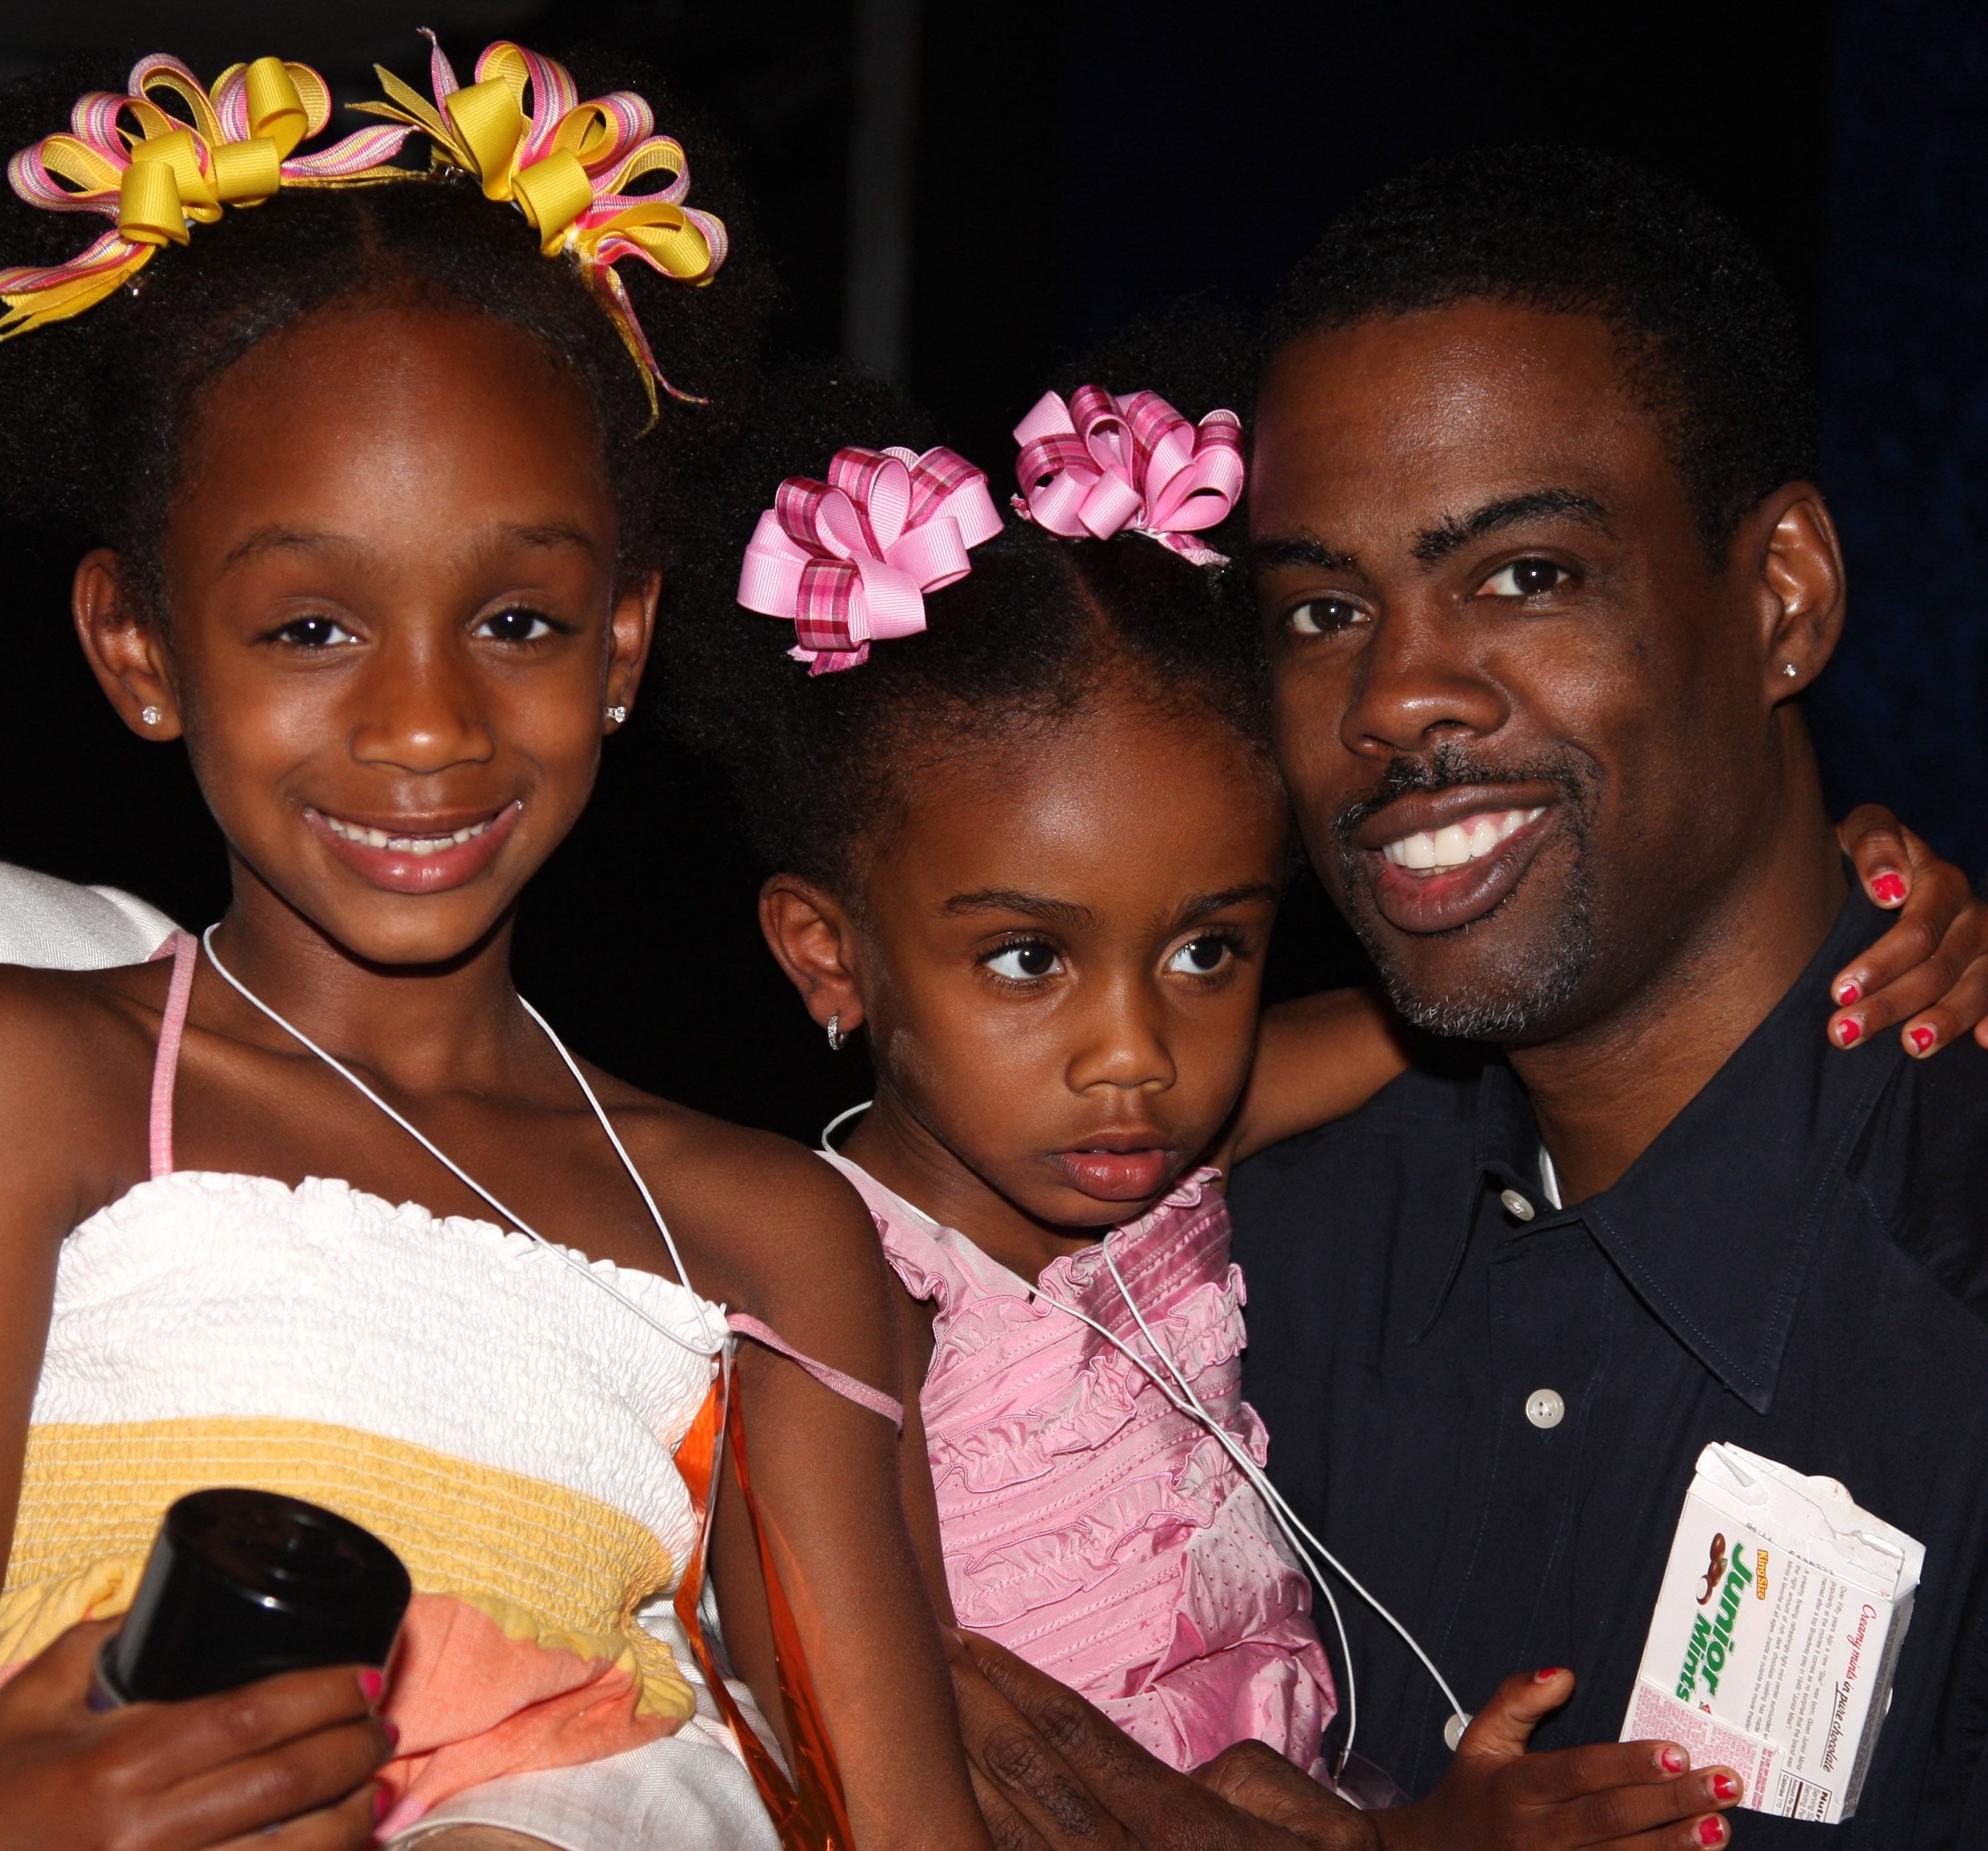 (L-R) Lola Simone Rock, Zahra Savannah Rock and Chris Rock pose at Lola's 6th birthday celebration at "Hairspray" on Broadway at the Neil Simon Theatre on June 28, 2008, in New York City | Source: Getty Images